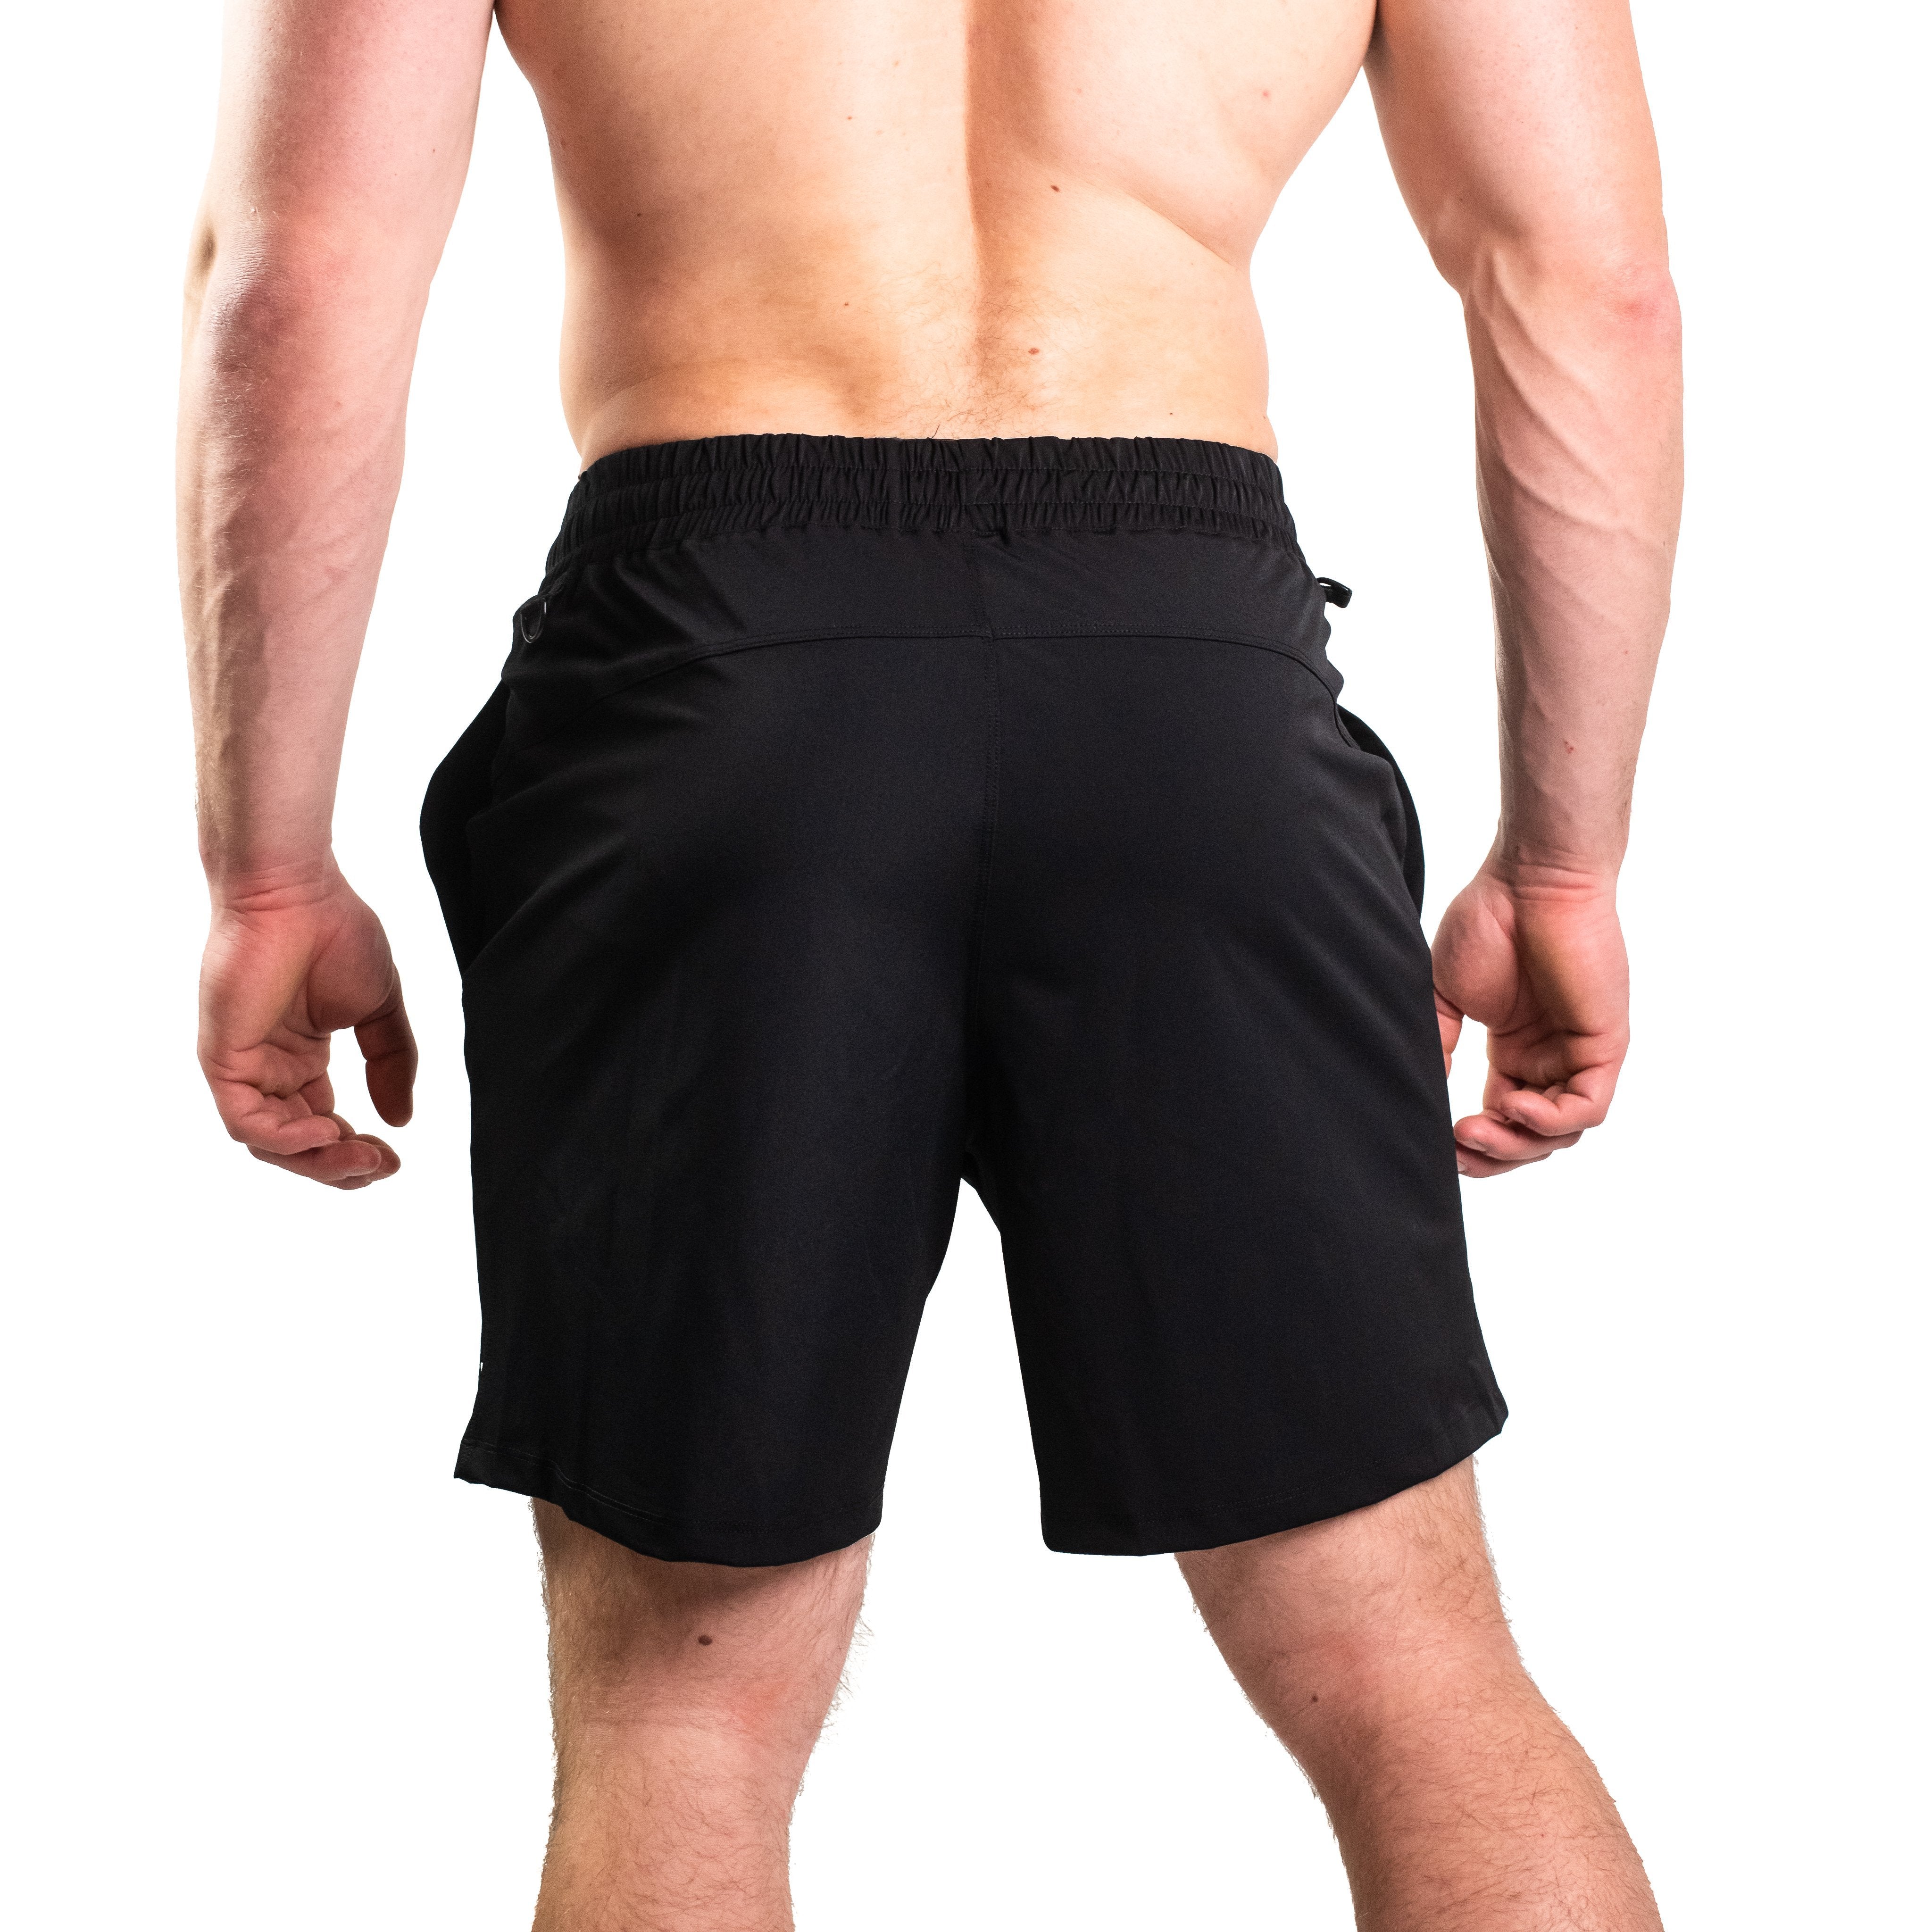 360-GO was created to provide the flexibility for all the movements in your training while offering the comfort and fit you have come to love through our shorts. These shorts offer 360 degrees of stretch in all angles and allow you to remain comfortable without limiting any movement in both training and life environments. 